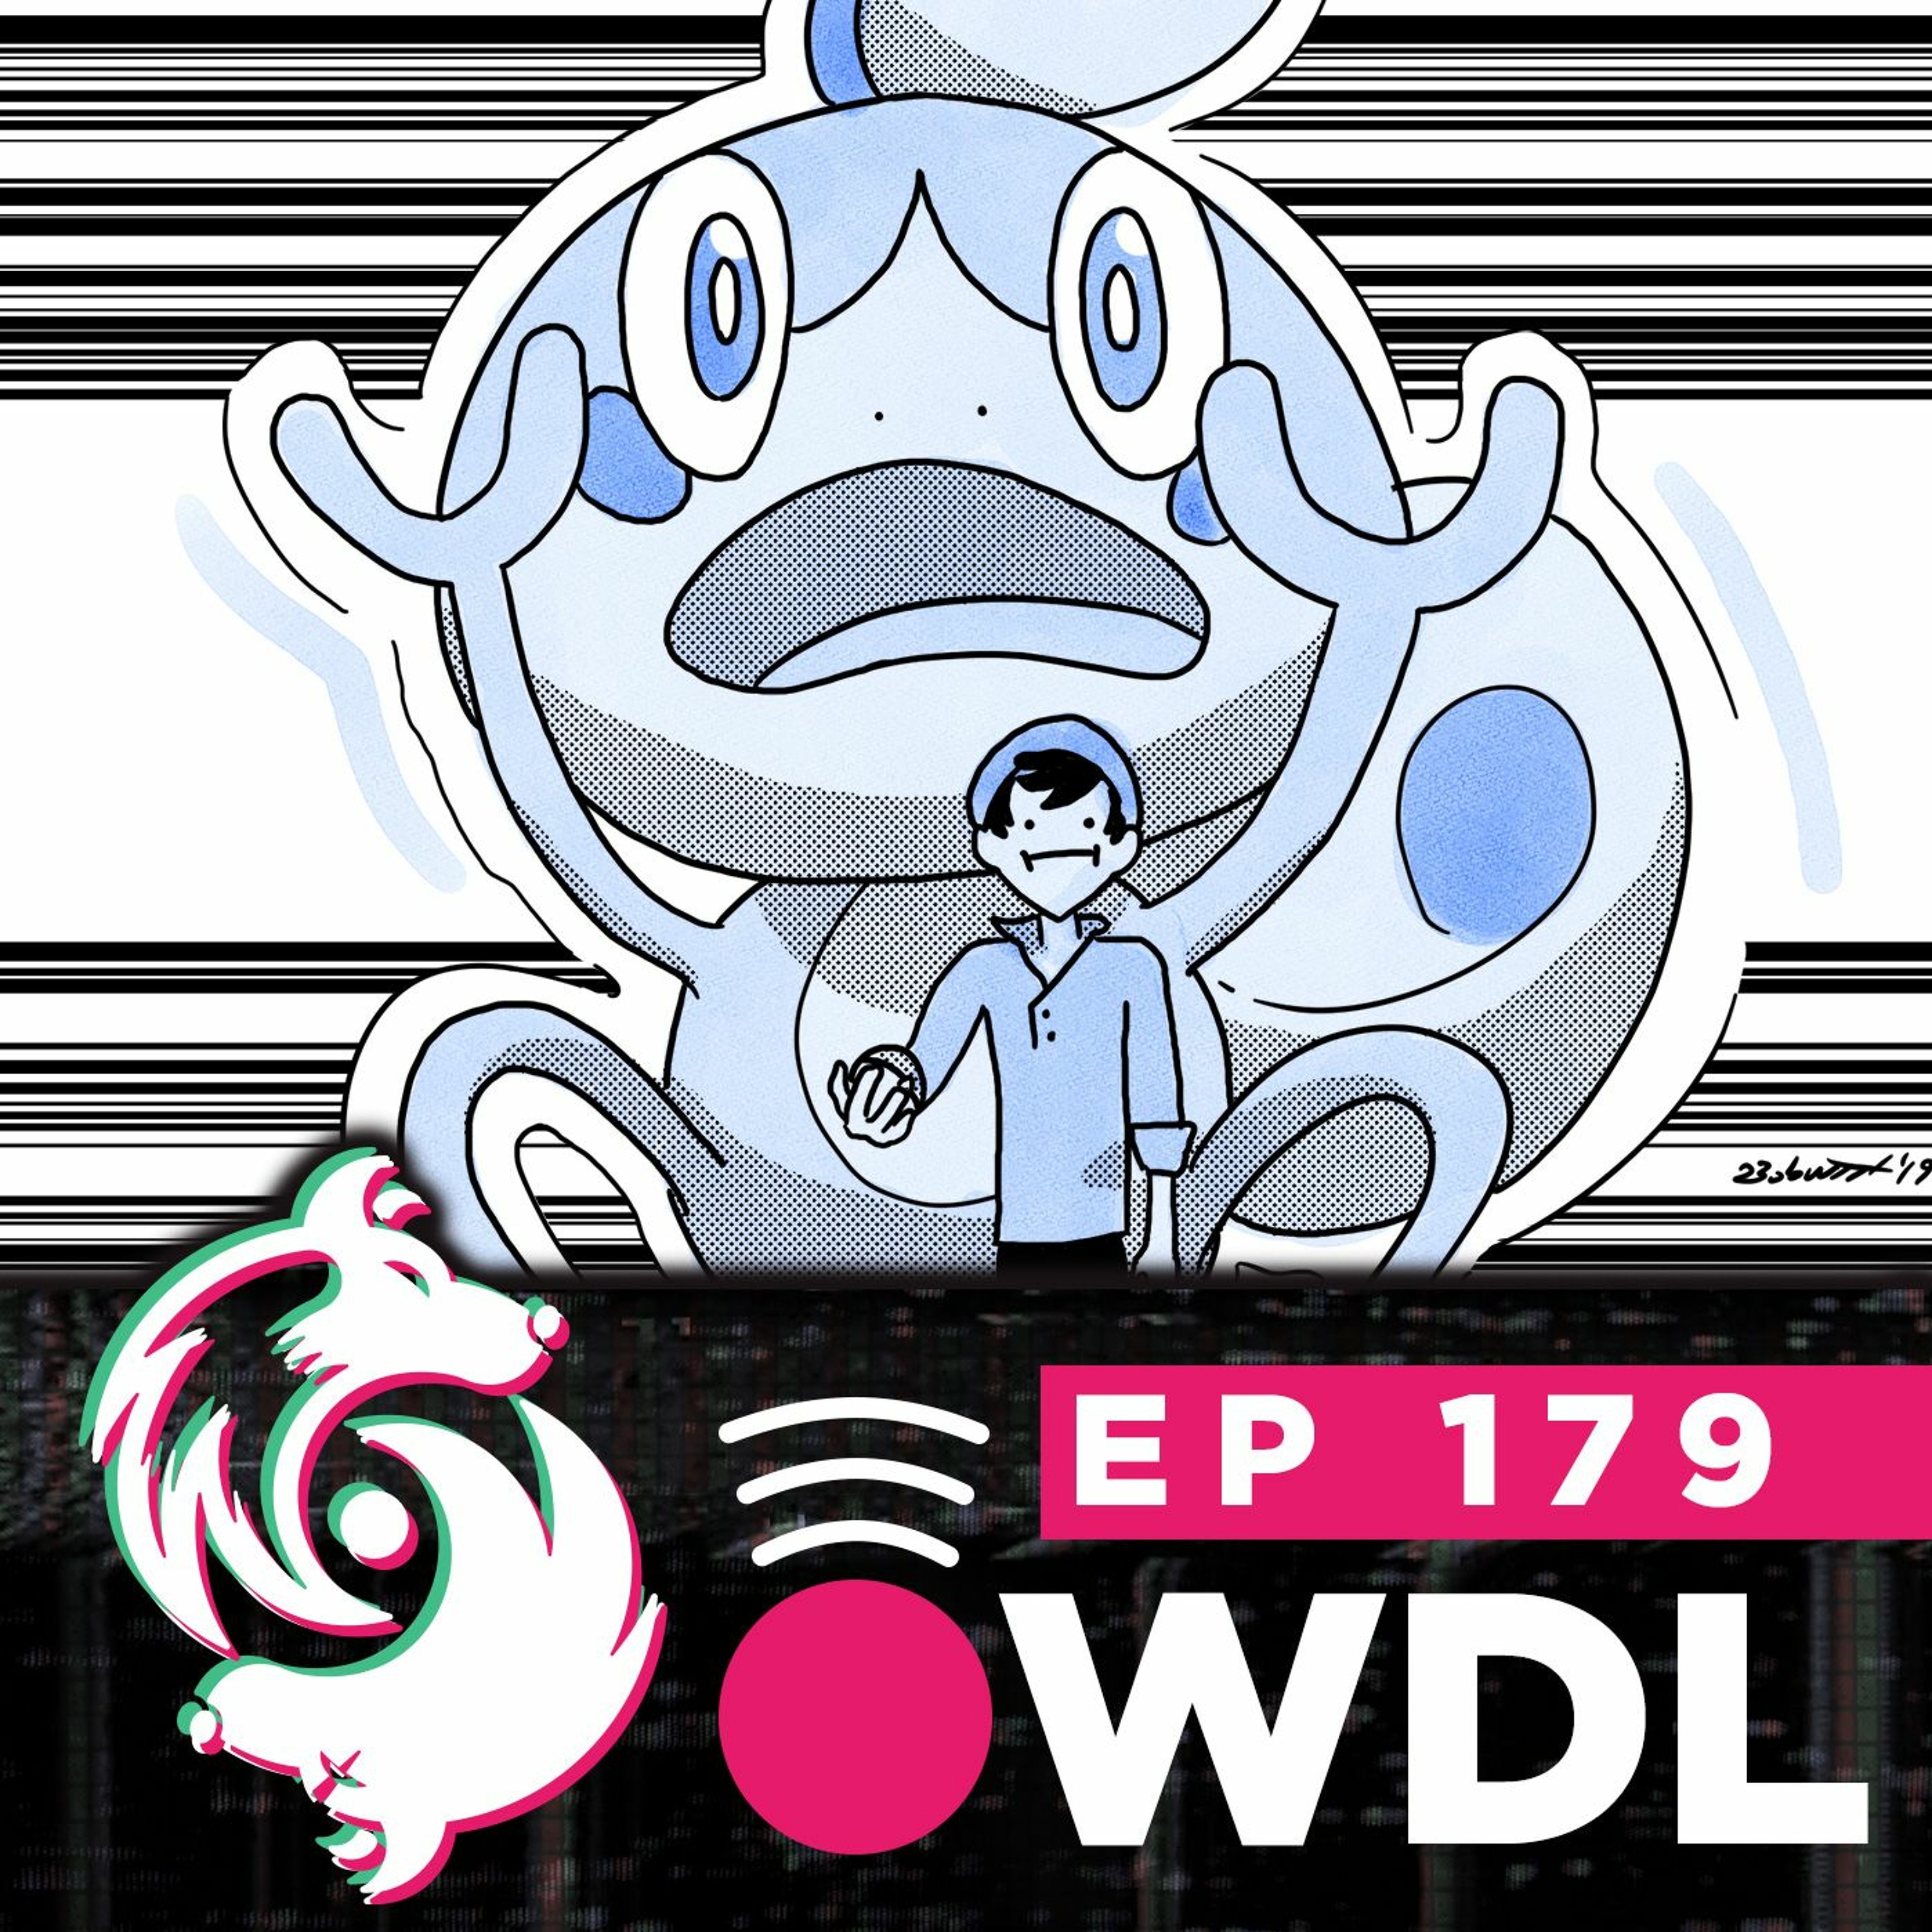 Pokémon Sword & Shield and all of the other news revealed before E3 2019 - WDL Ep 179